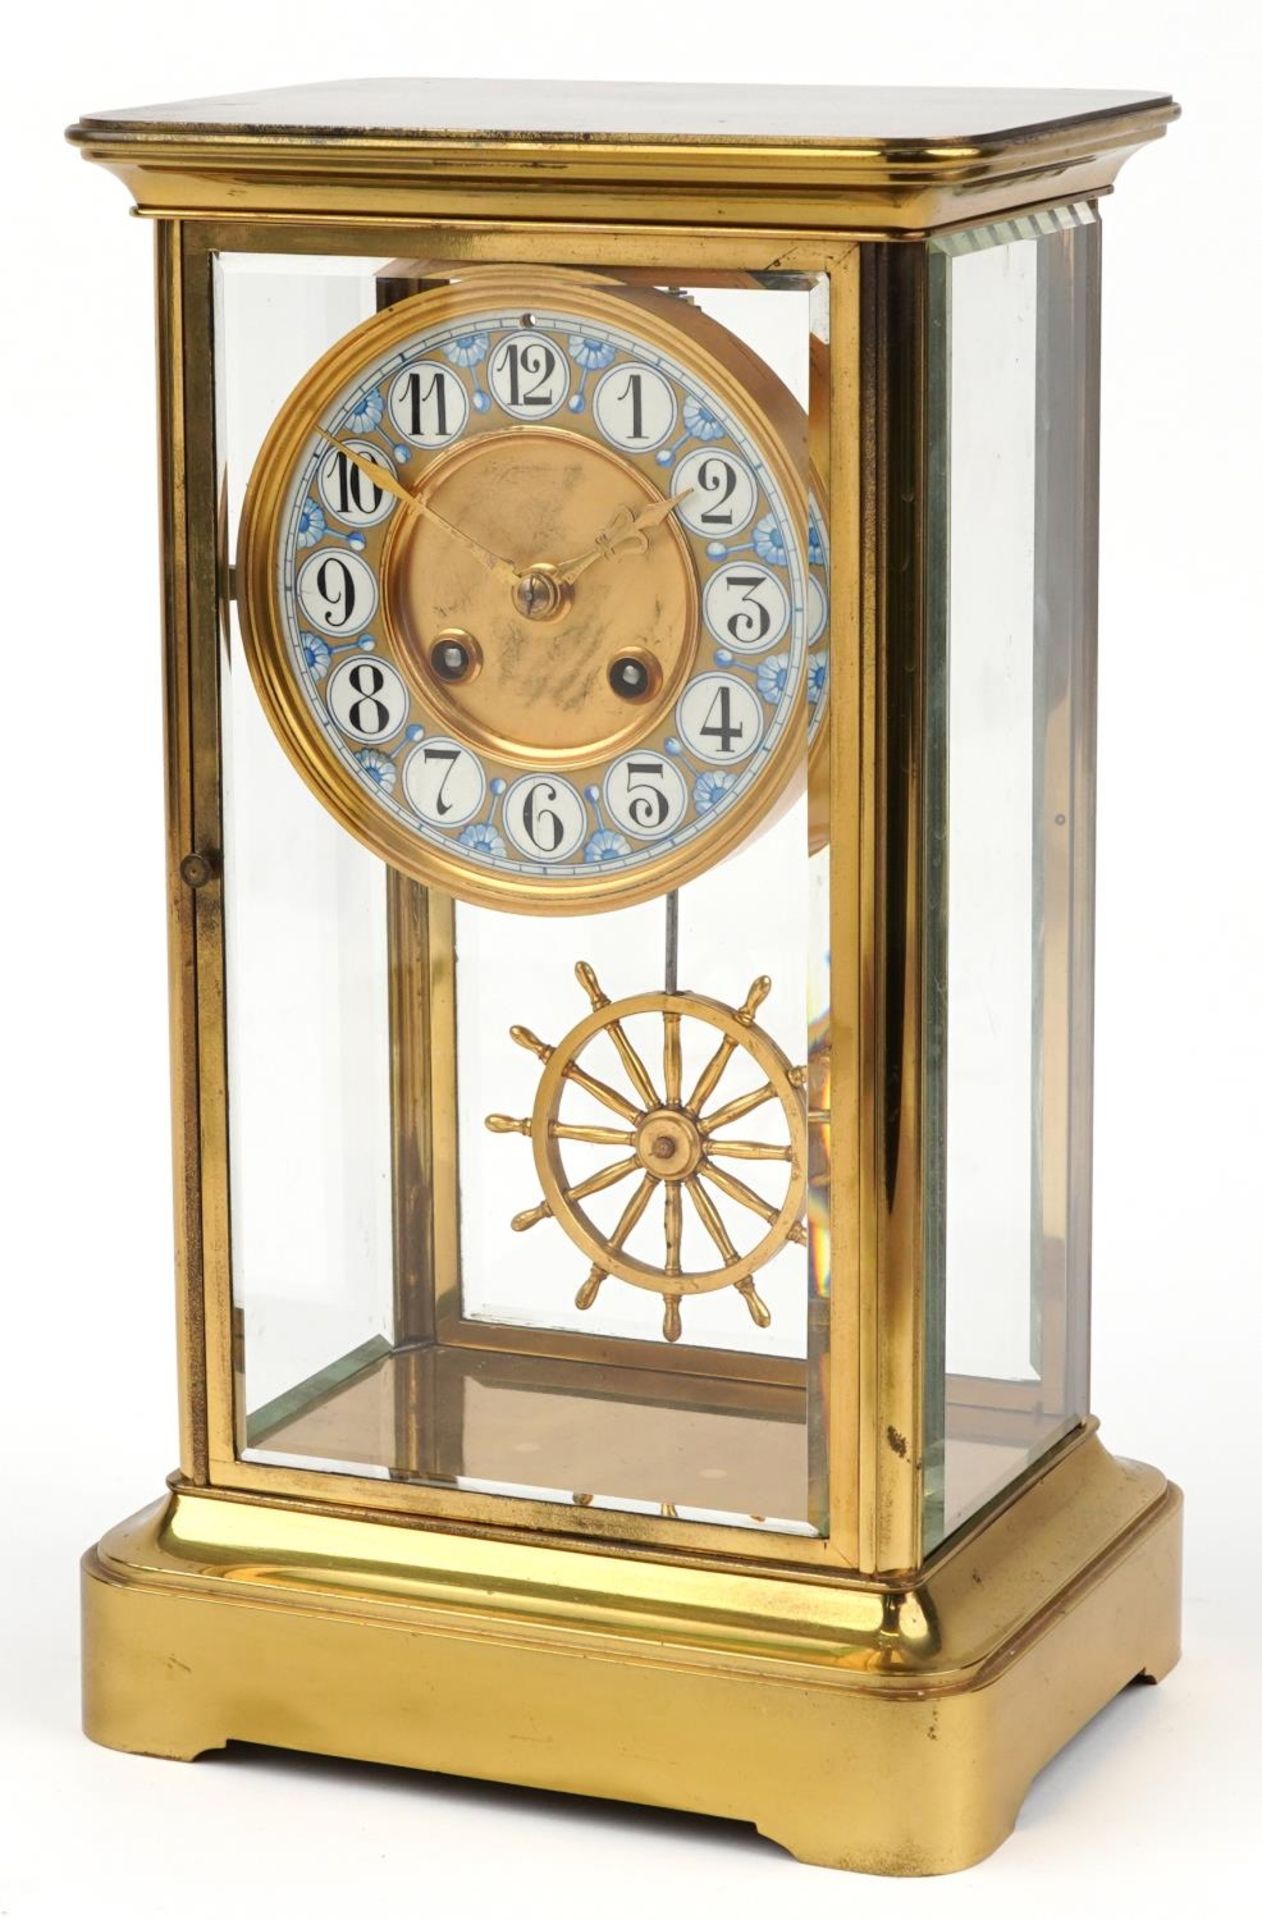 Japy Freres, 19th century French aesthetic four glass mantle clock striking on a bell with ship's